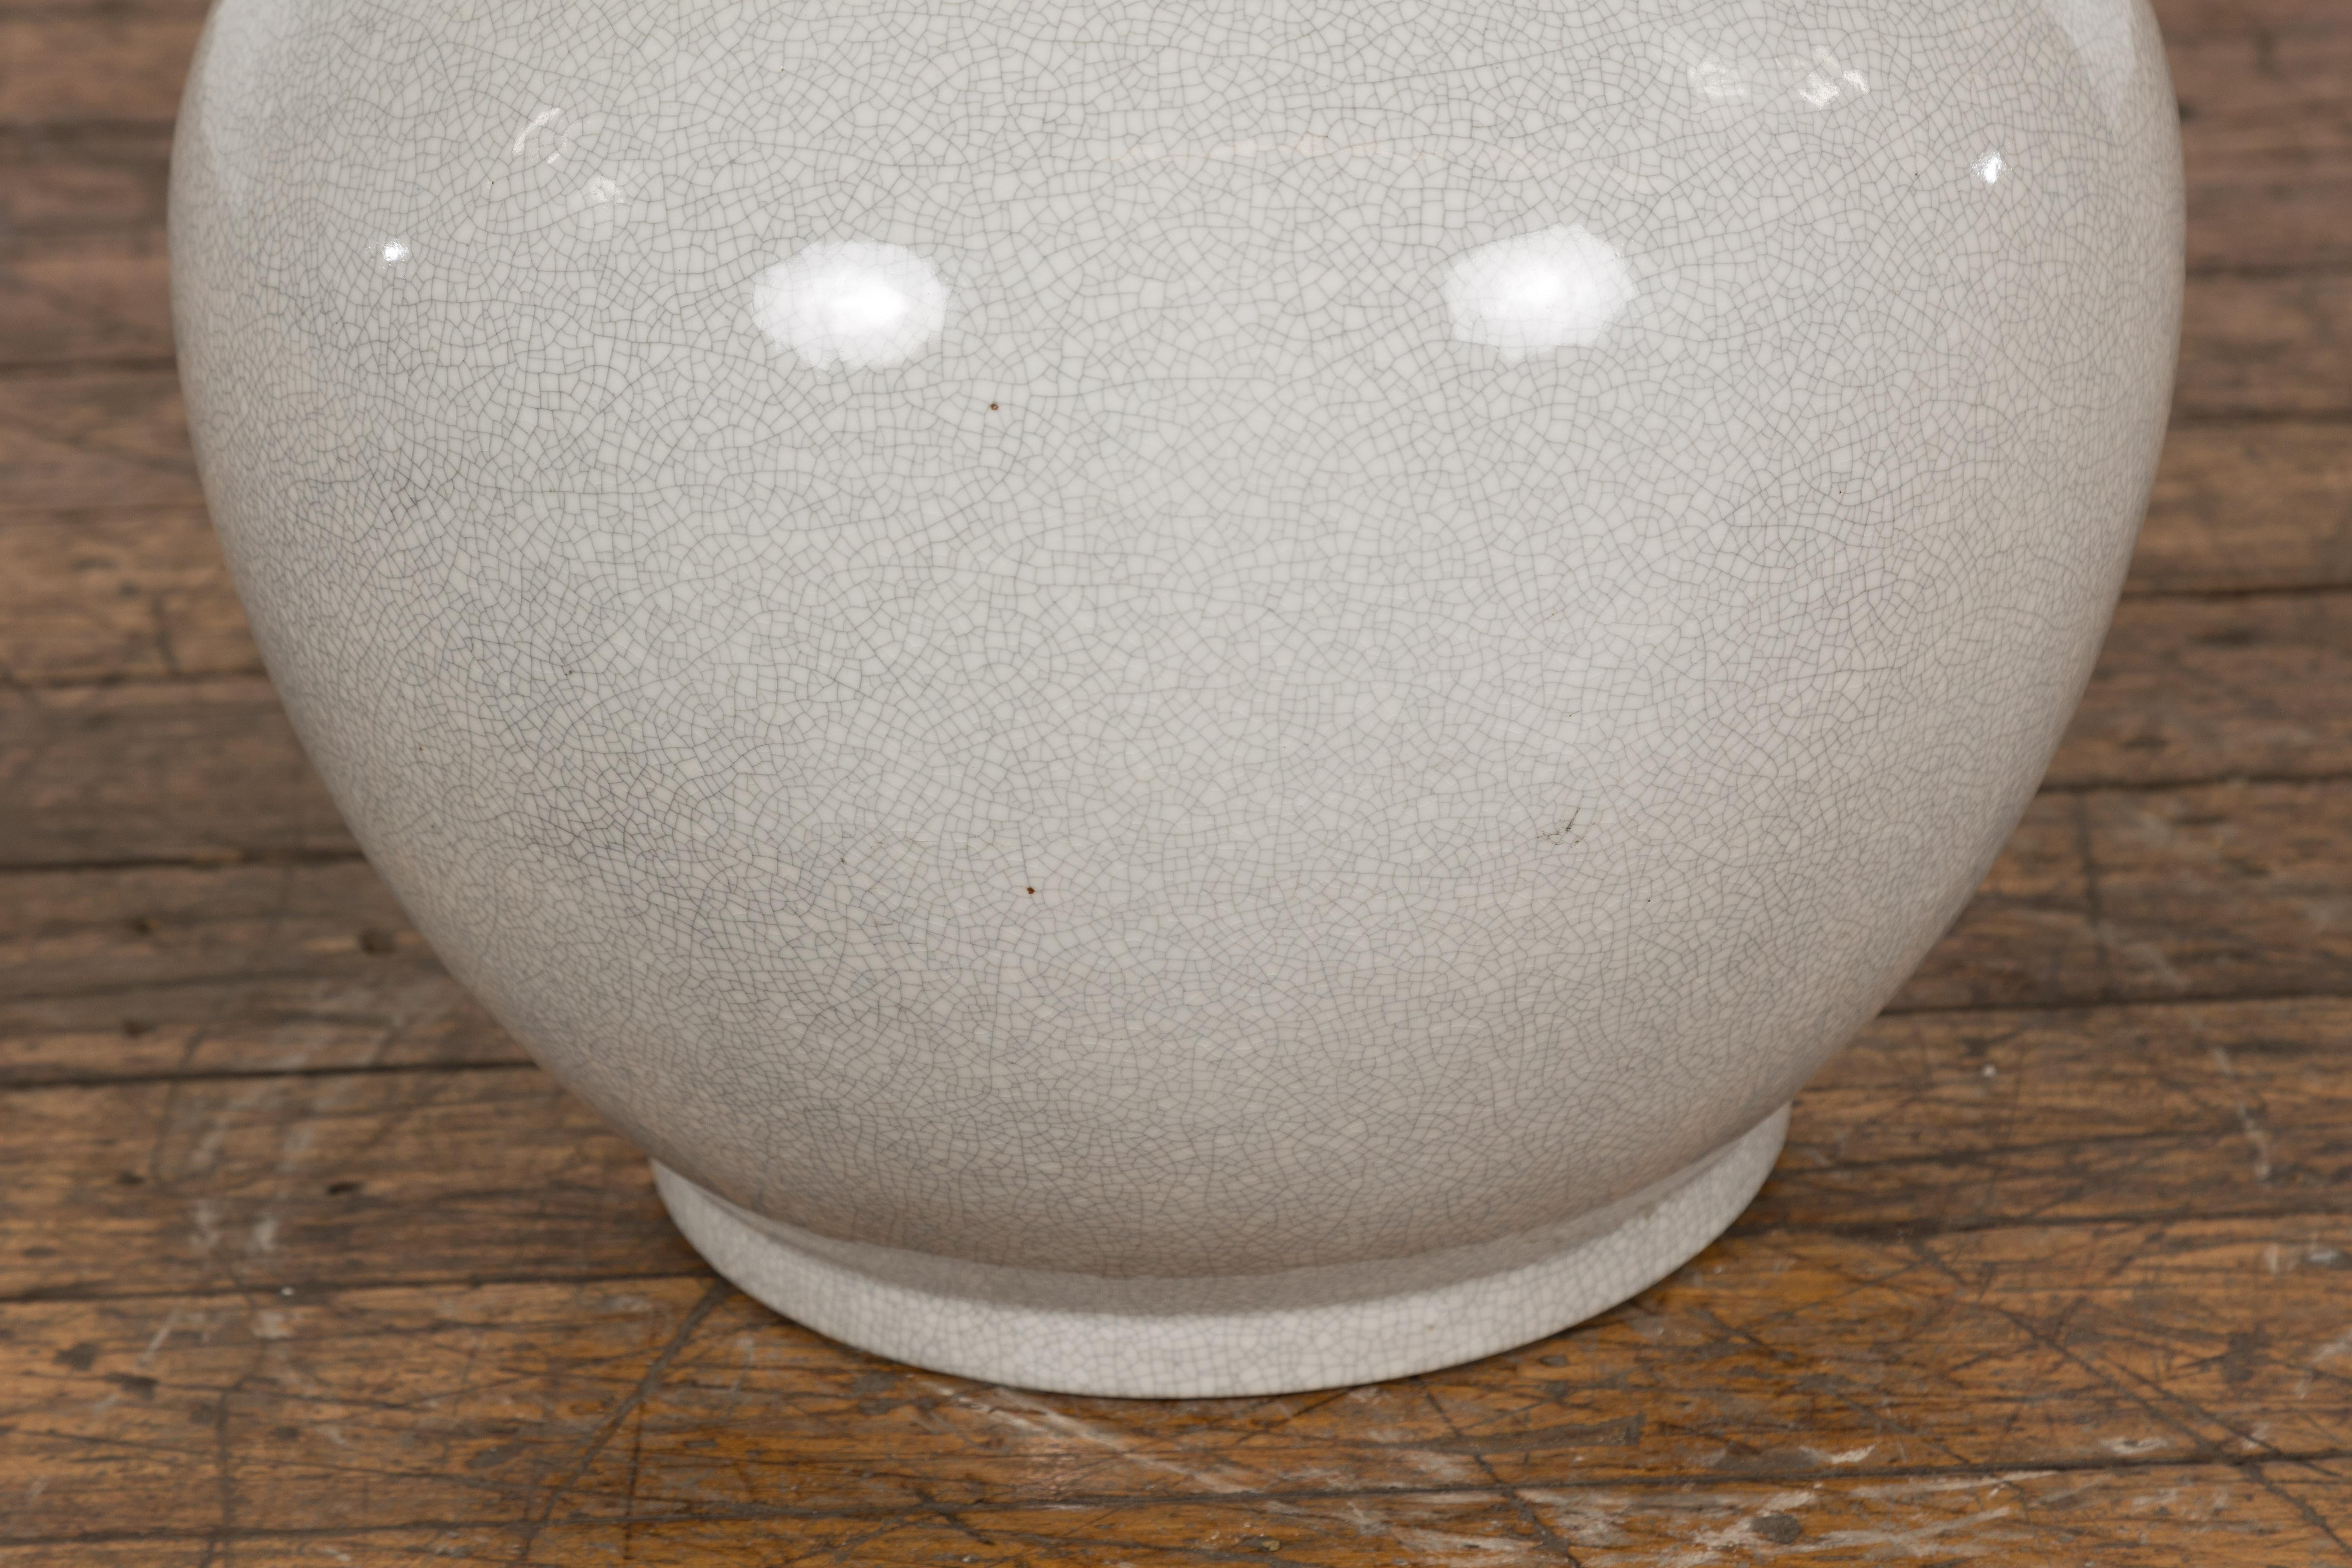 Chinese Vintage Kendi Shape Vase with Crackle Grey and White Finish For Sale 2